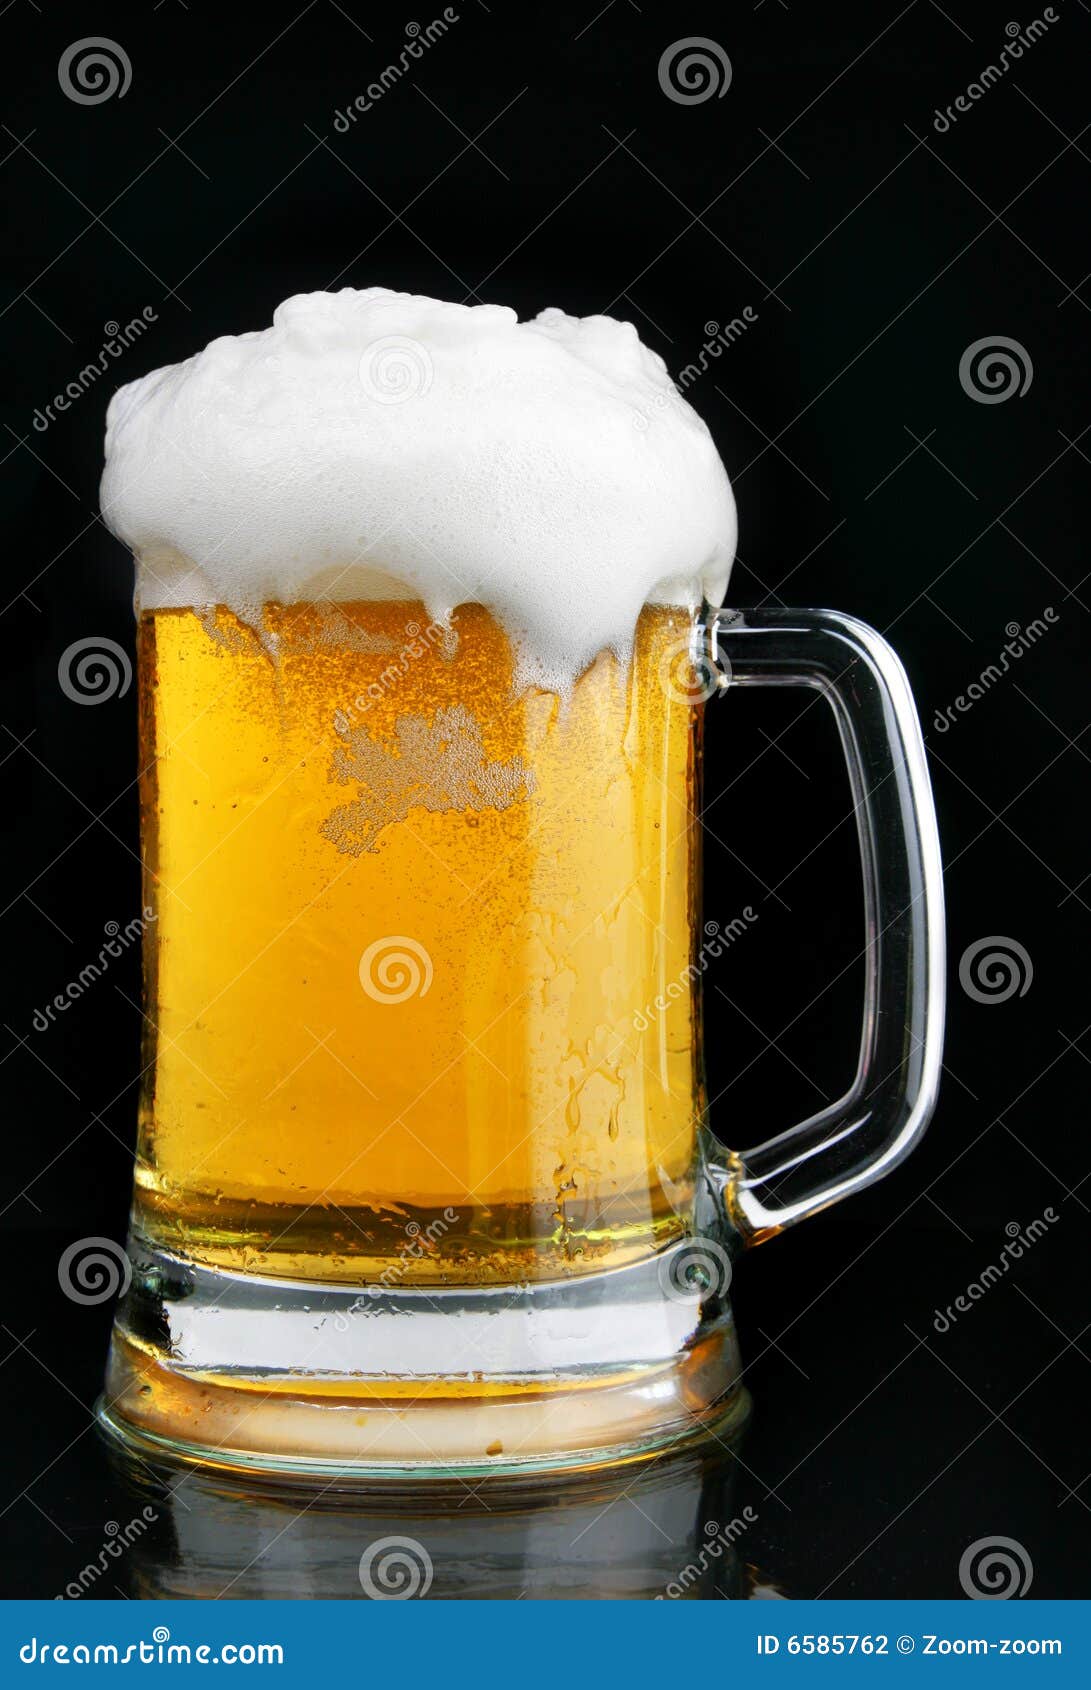 mug of beer with froth